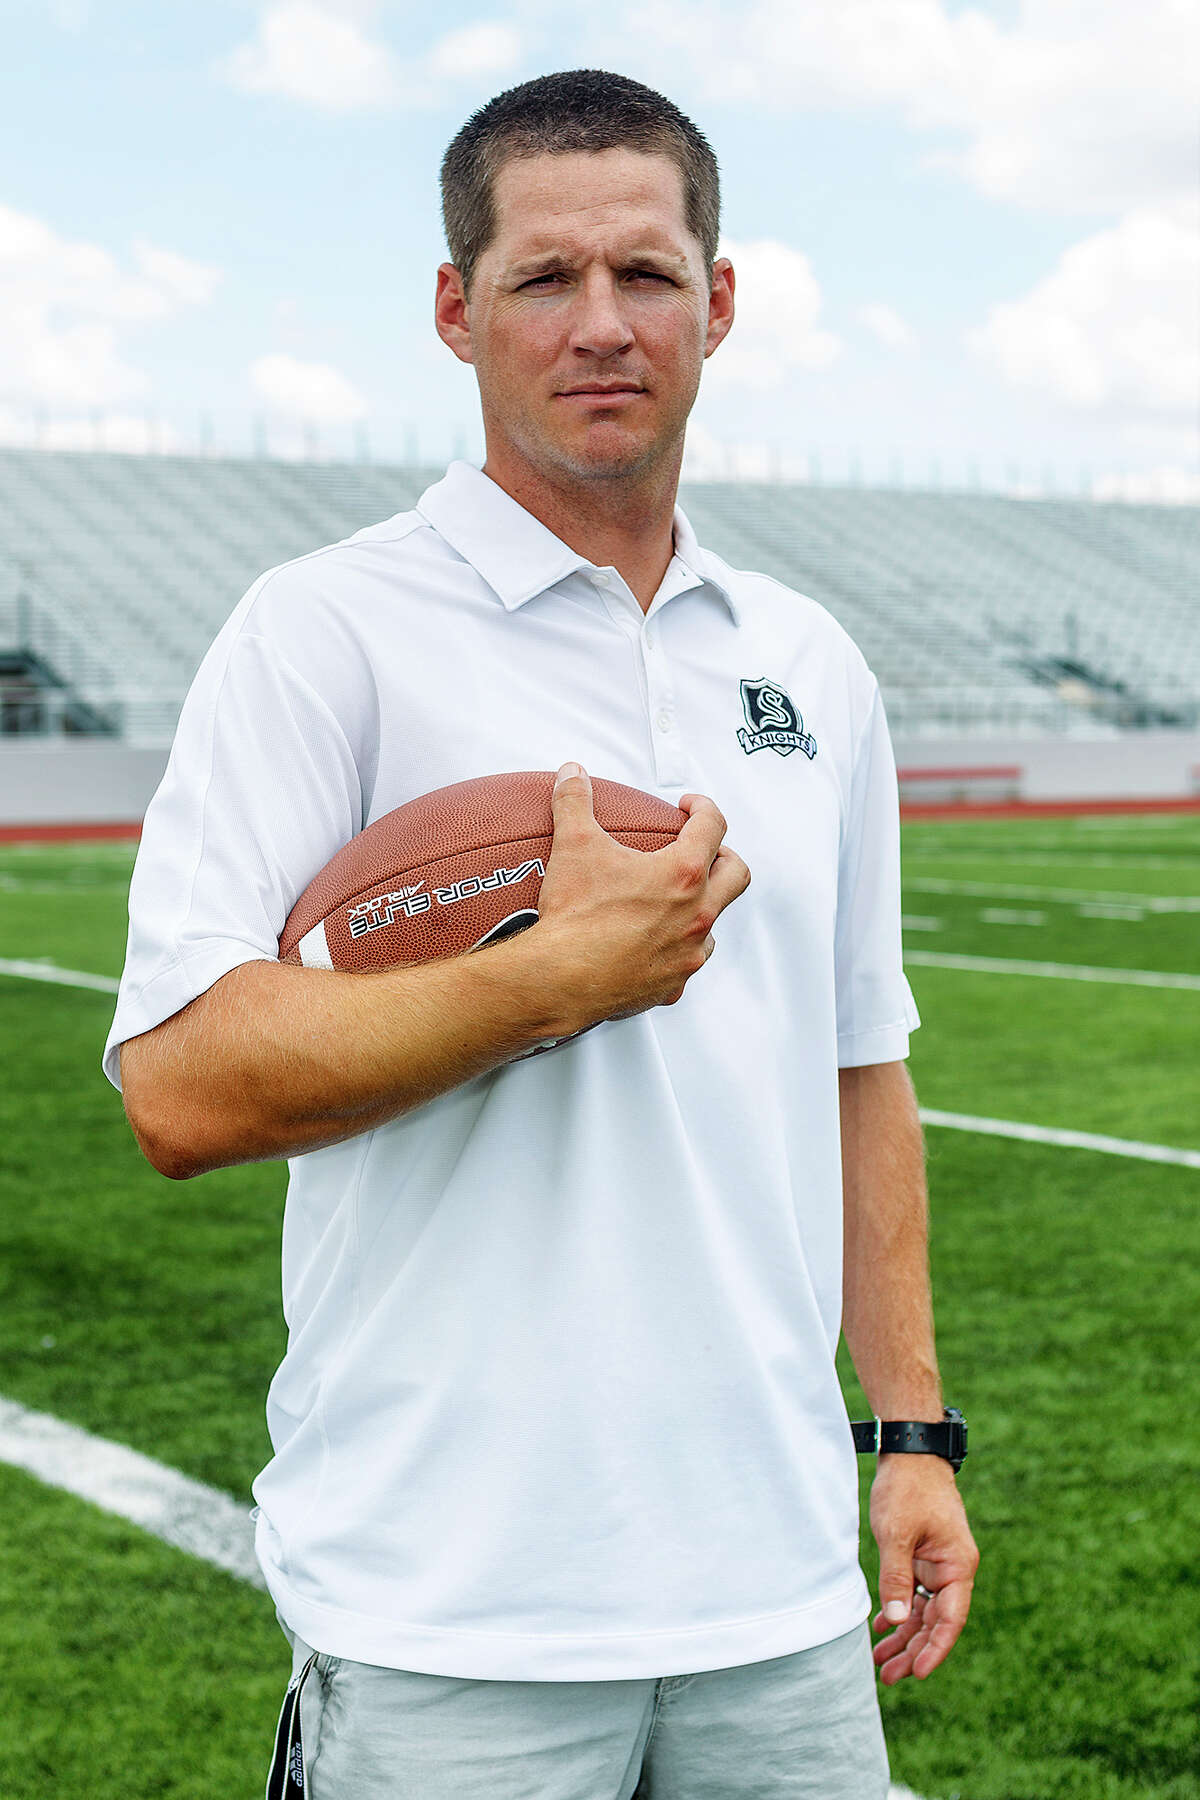 Scott Lehnhoff, the new head football coach at Steele High School, at Rutledge Stadium on Monday, Aug. 12, 2013. Lehnhoff replaces Mike Jinks who left to coach running backs at Texas Tech. Photo by Marvin Pfeiffer / Prime Time Newspapers